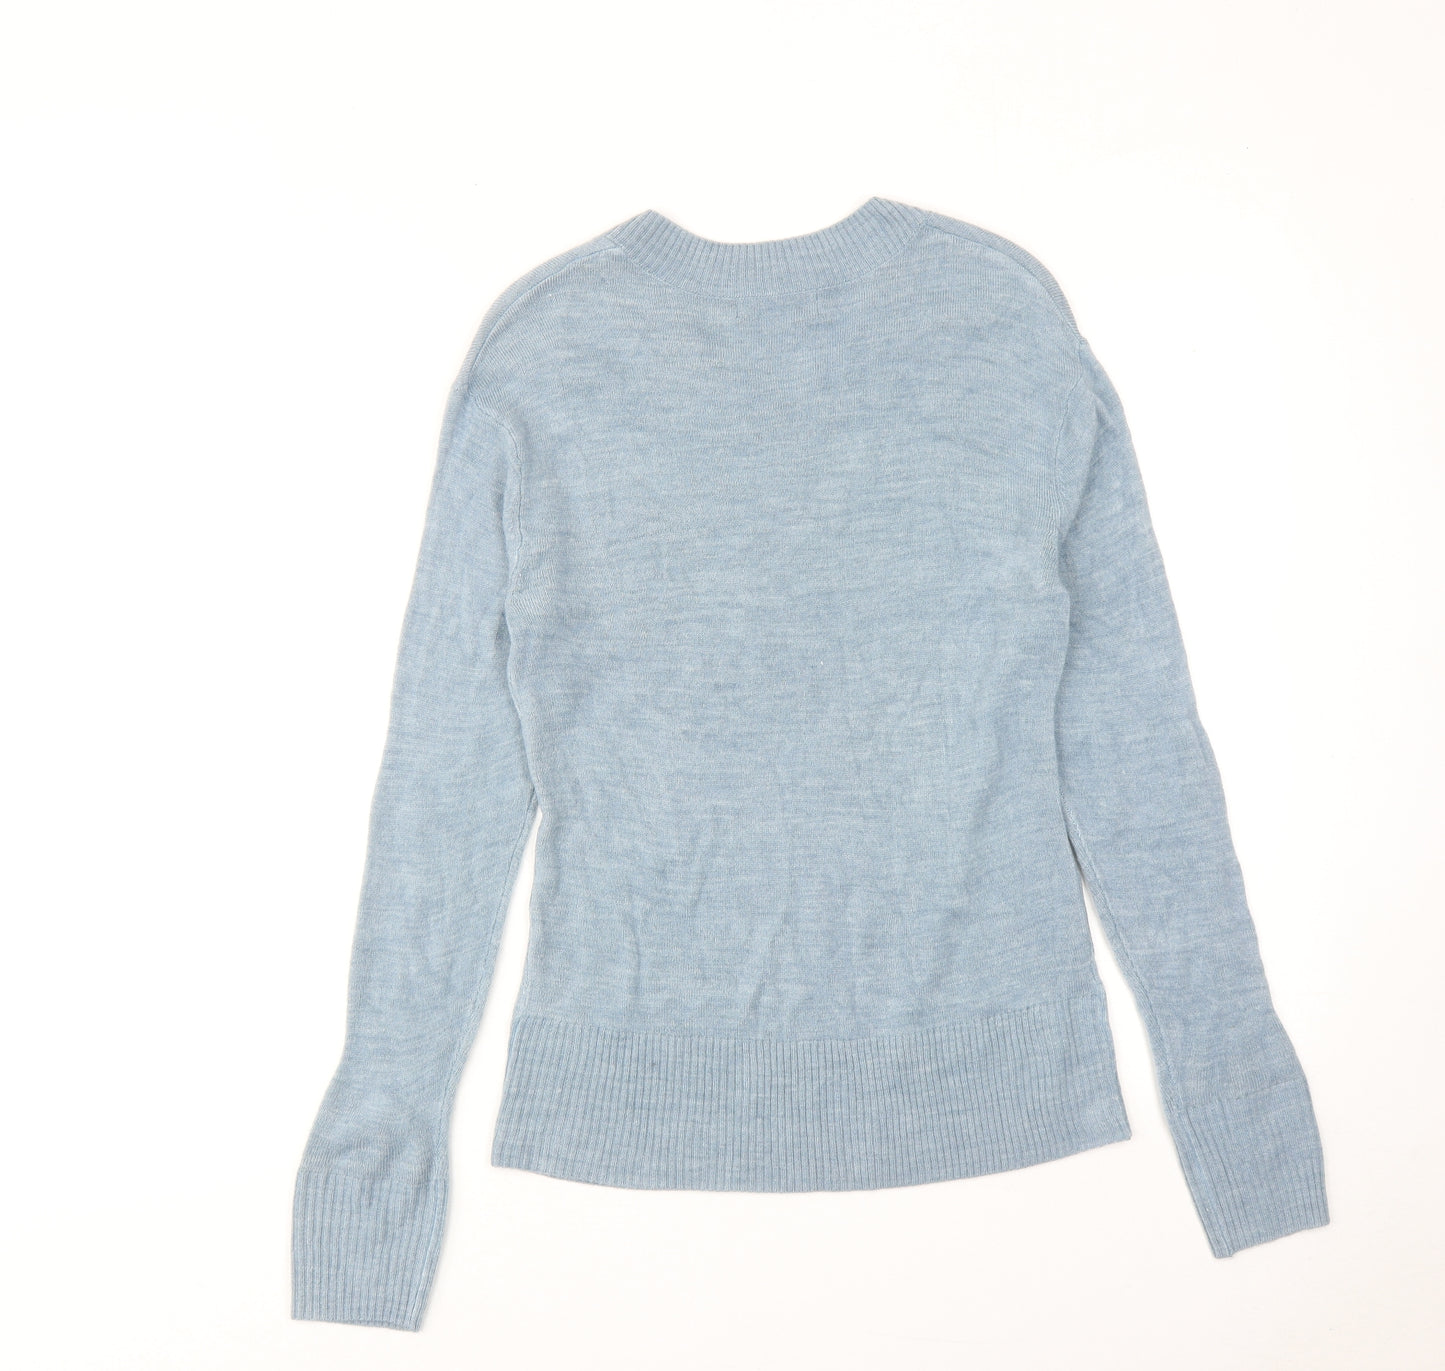 Marks and Spencer Womens Blue V-Neck Acrylic Pullover Jumper Size 10